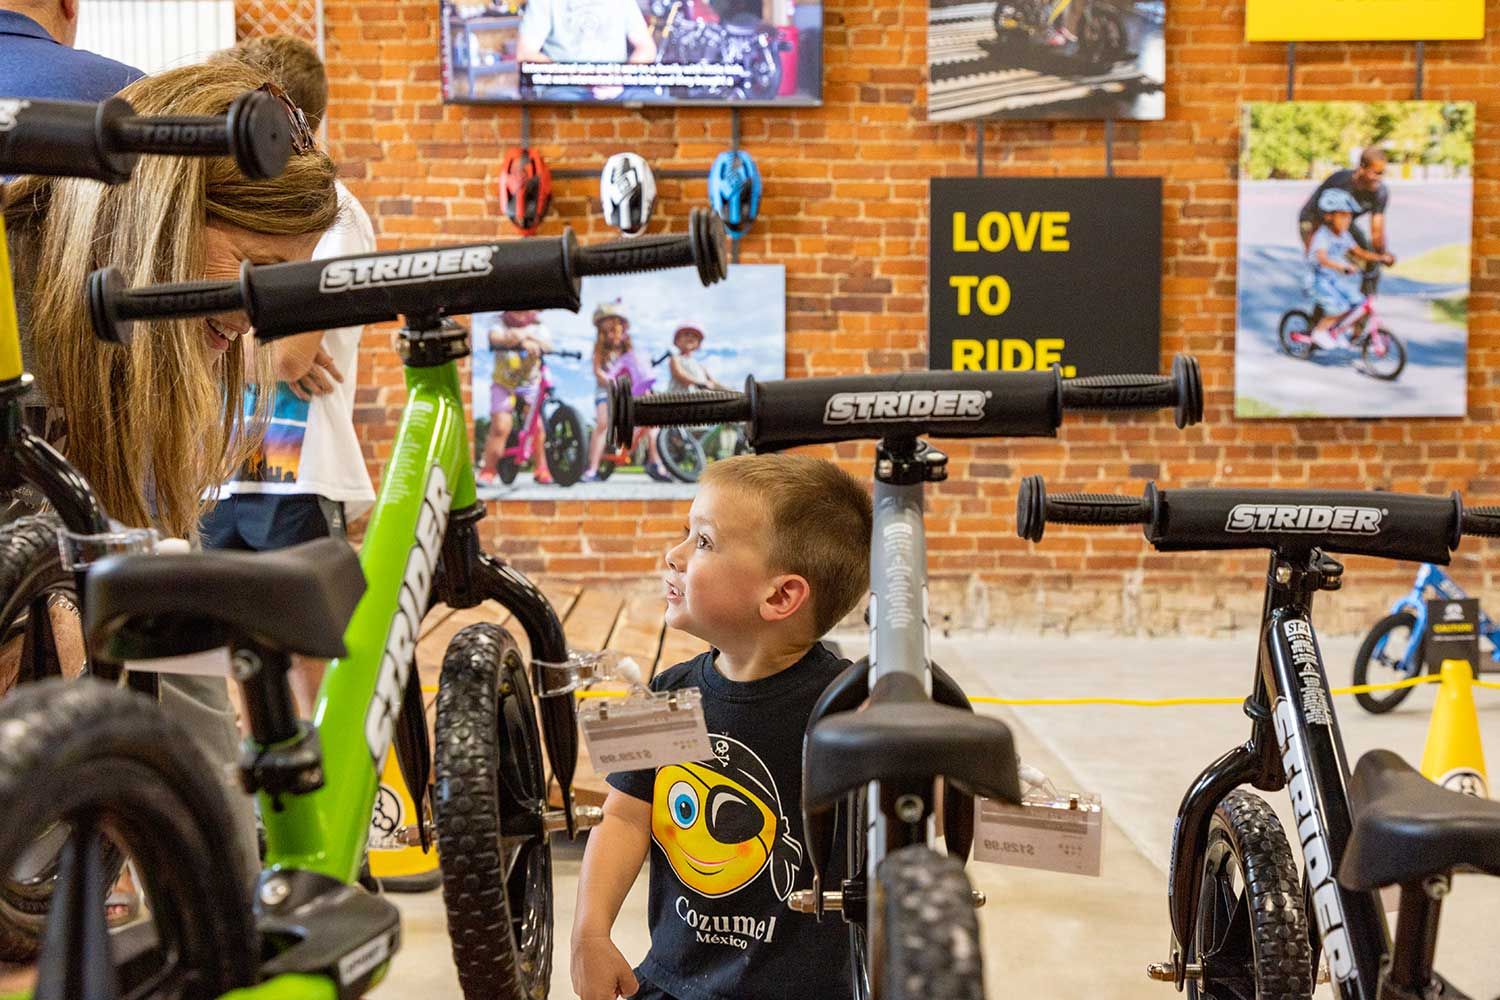 A young boy looks at a Strider balance bike in the Bentonville, Arkansas, Strider Store